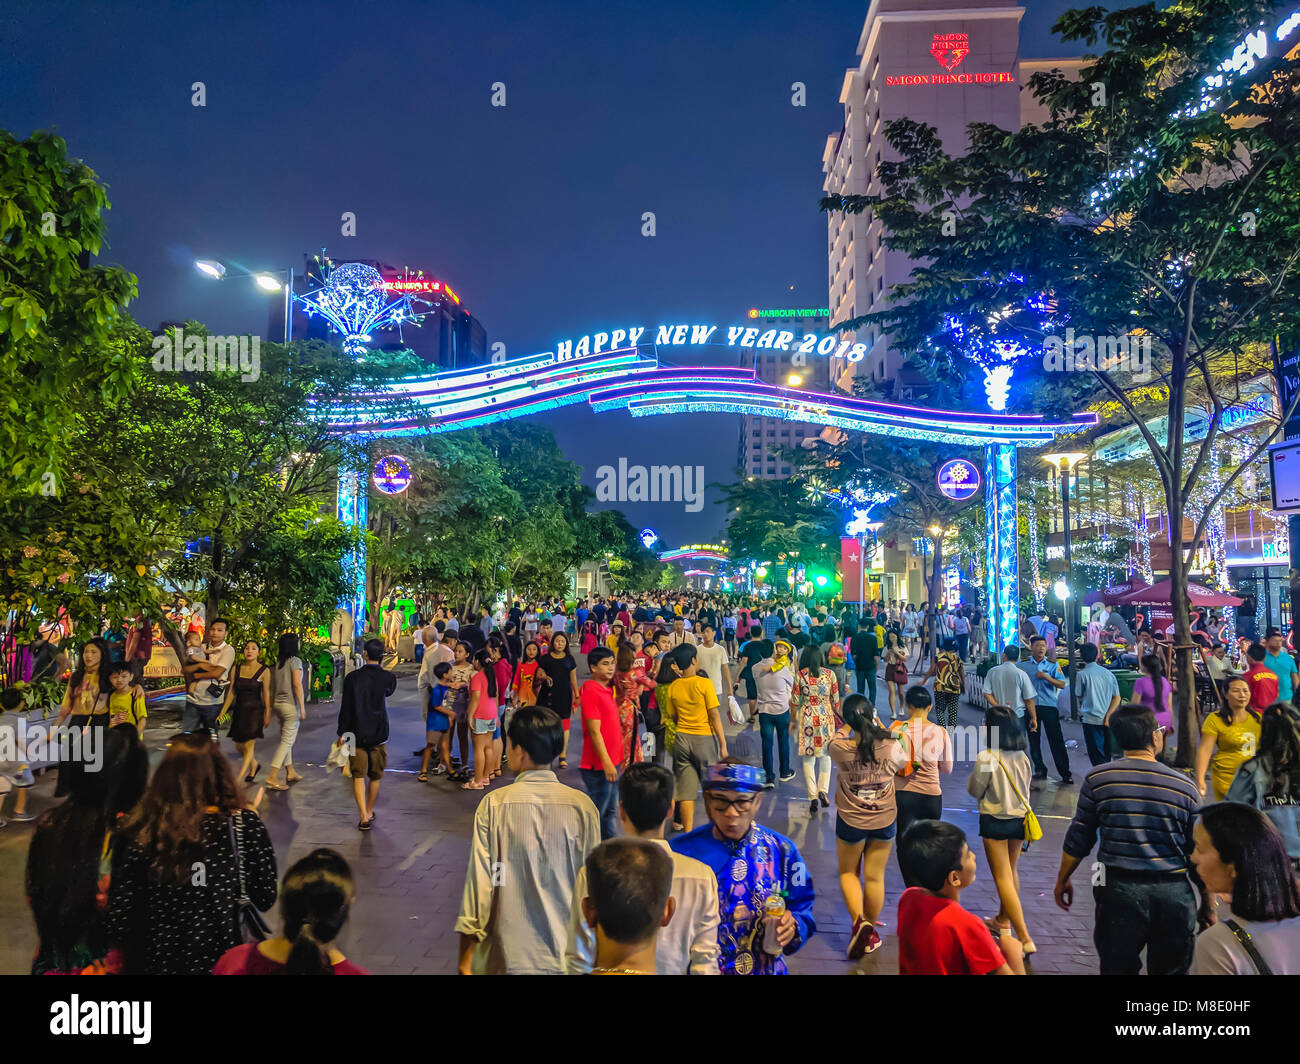 Crowds of people gather to celebrate Chinese Lunar New Year 2018, Ho Chi Minh City, Saigon, Vietnam Stock Photo